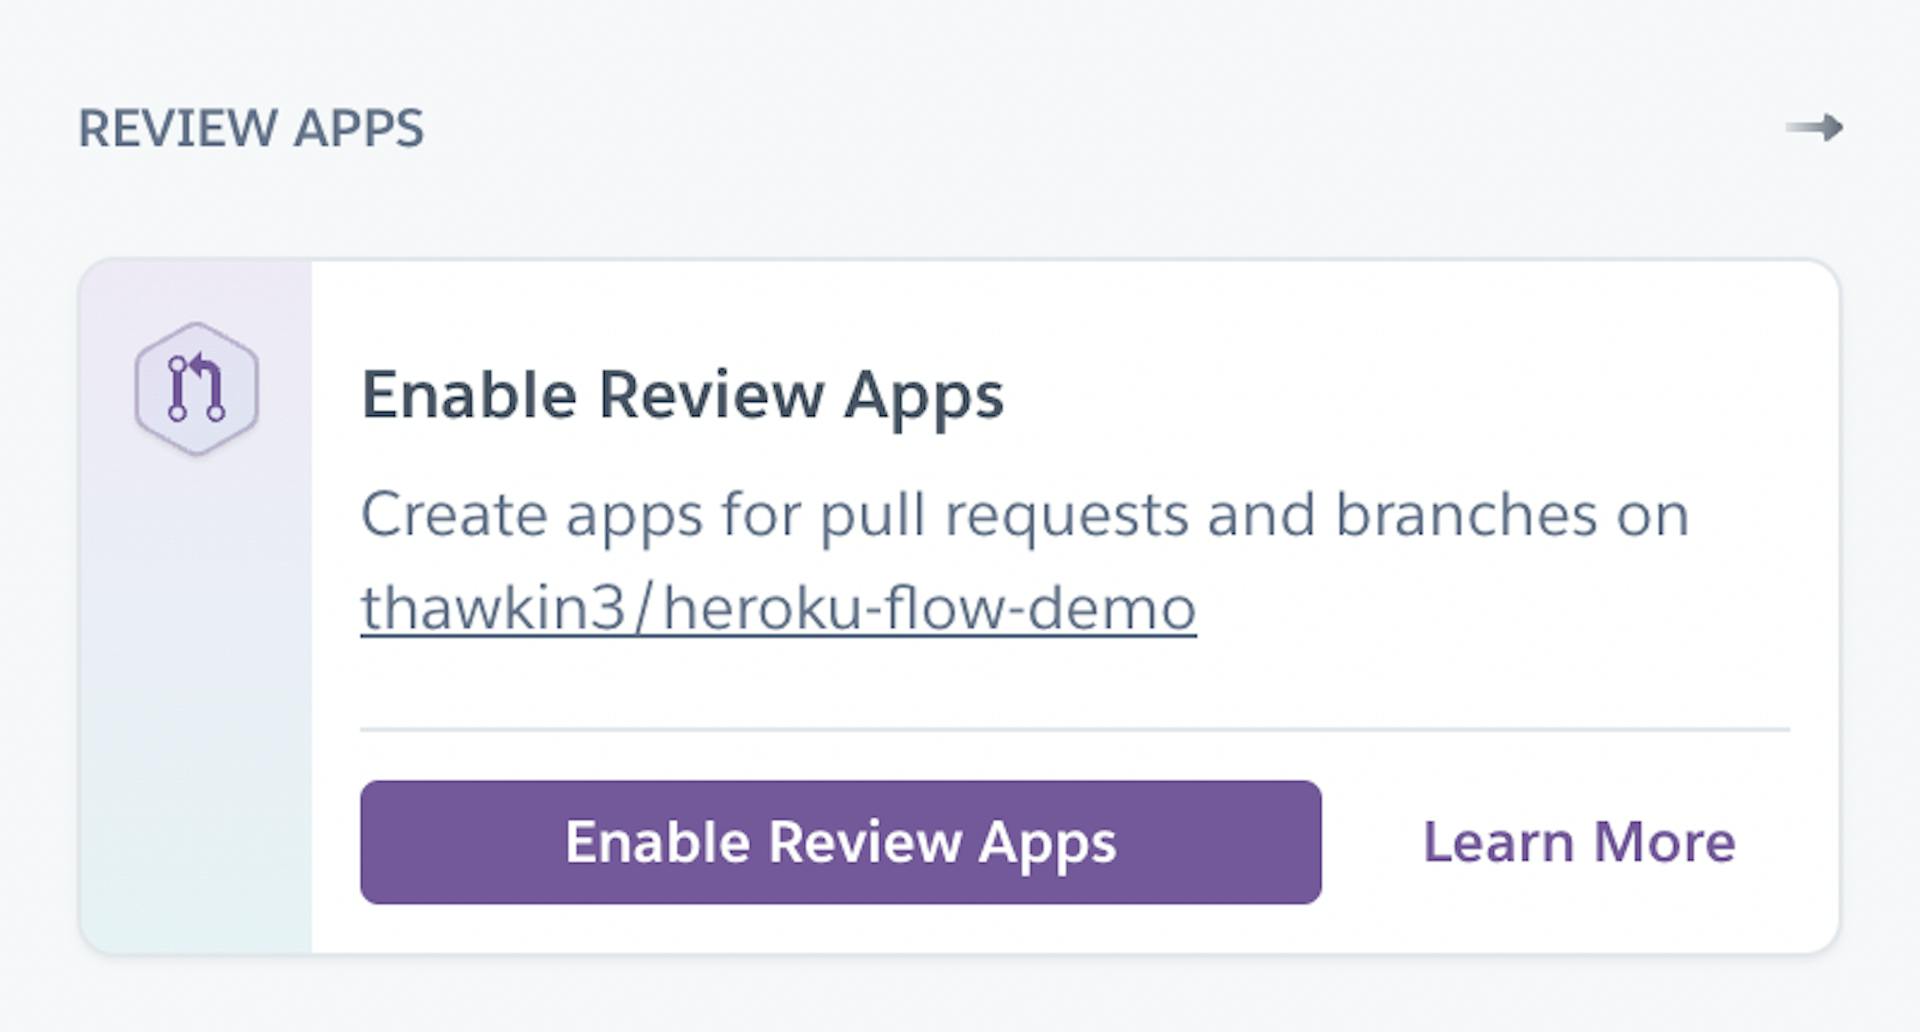 Enable Review Apps